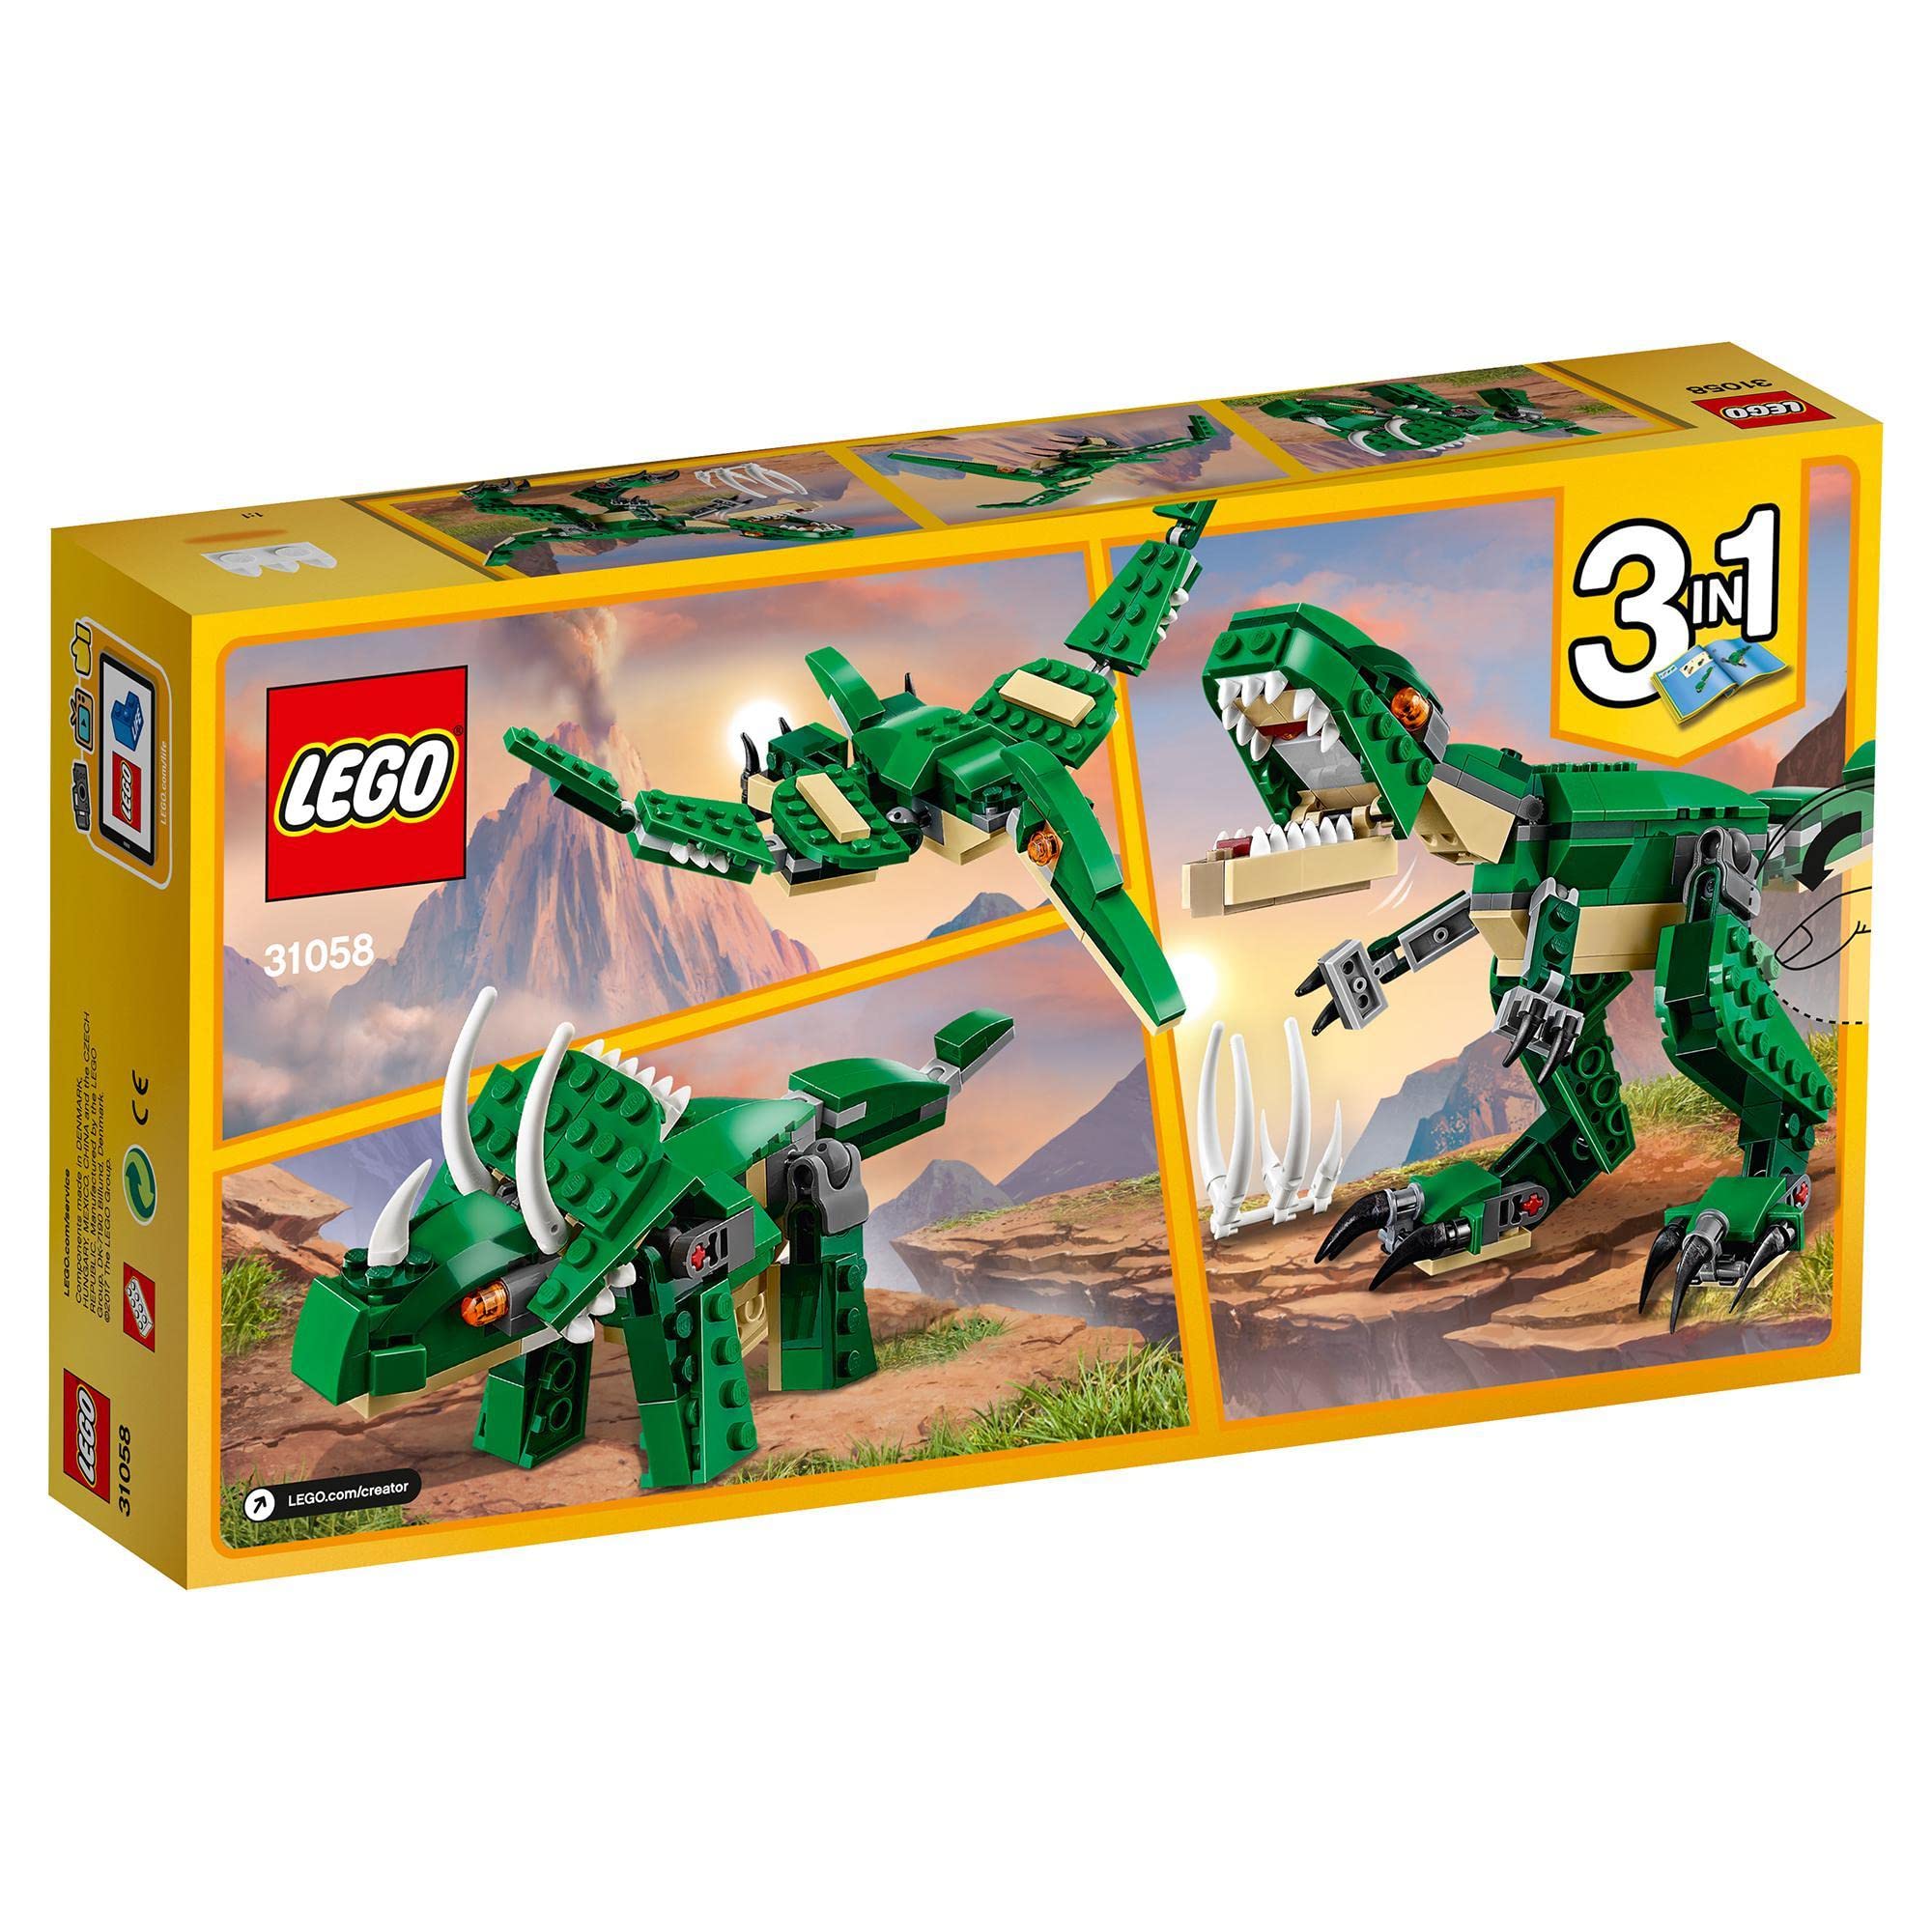 LEGO 31058 Creator Mighty Dinosaurs Toy, 3 in 1 Model, T. rex, Triceratops and Pterodactyl Dinosaur Figures, Gifts for 7-12 Year Old kids, Boys & Girls